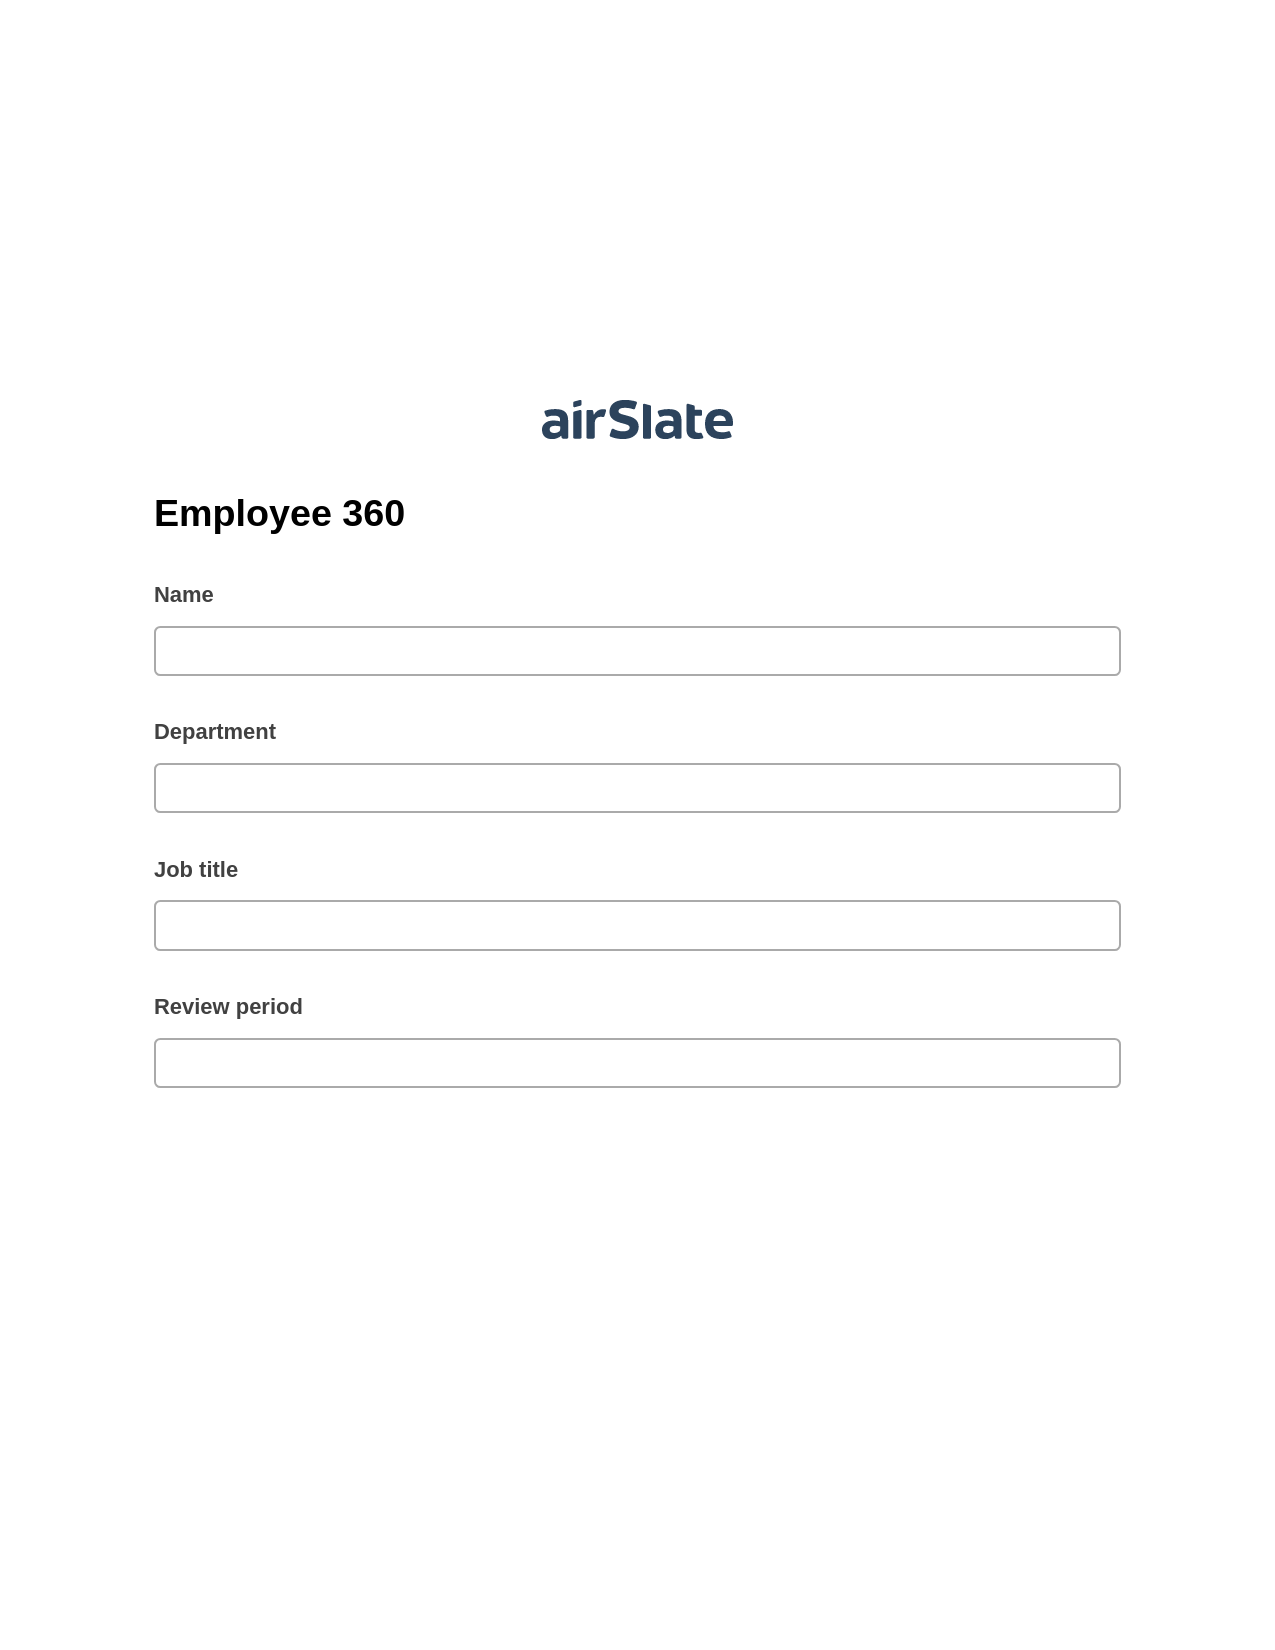 Multirole Employee 360 Pre-fill from Salesforce Records Bot, Google Cloud Print Bot, Archive to SharePoint Folder Bot